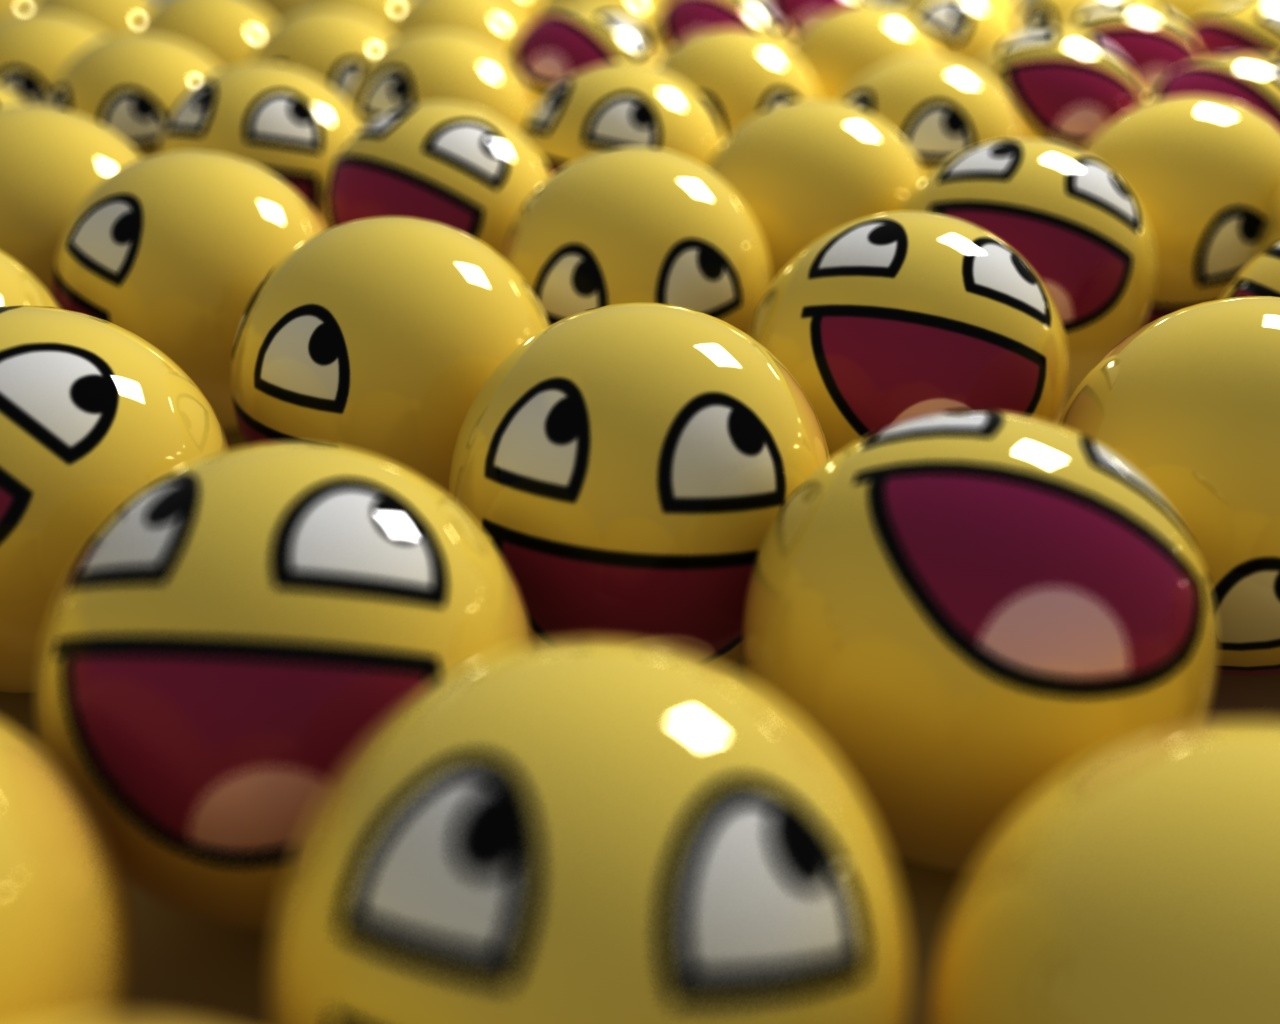 General 1280x1024 awesome face smiley CGI ball